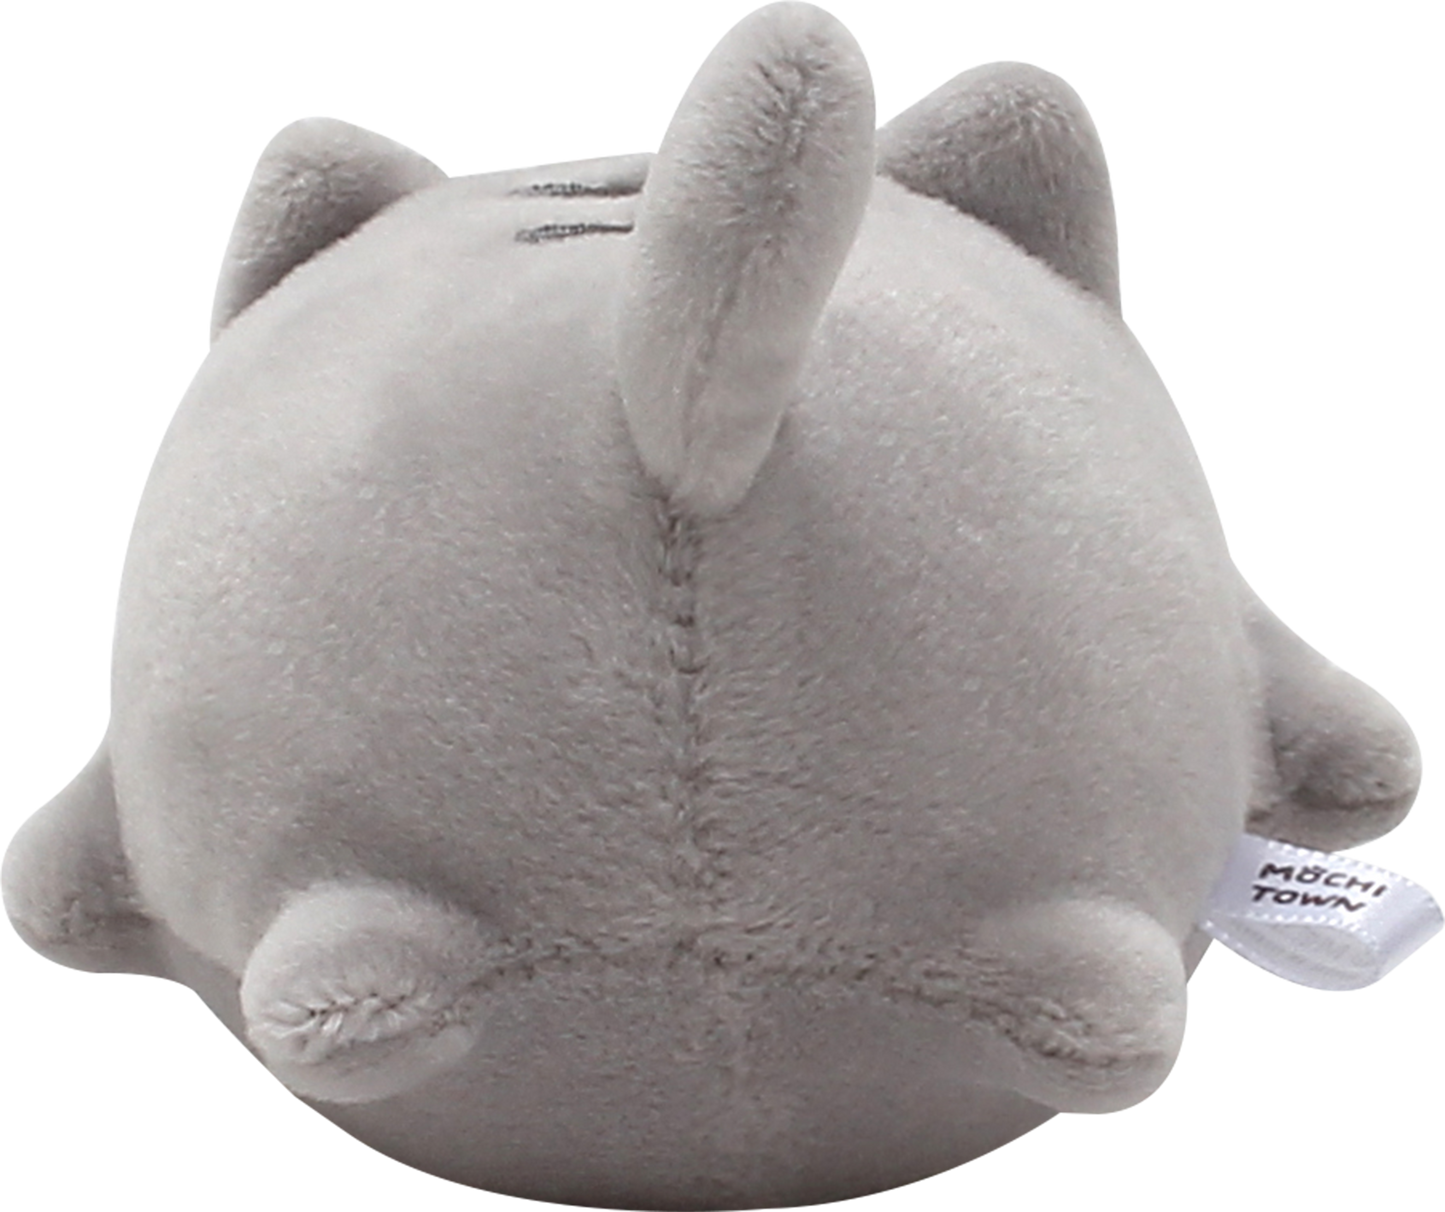 Back view of Mackerel, a grey and white cat plush.